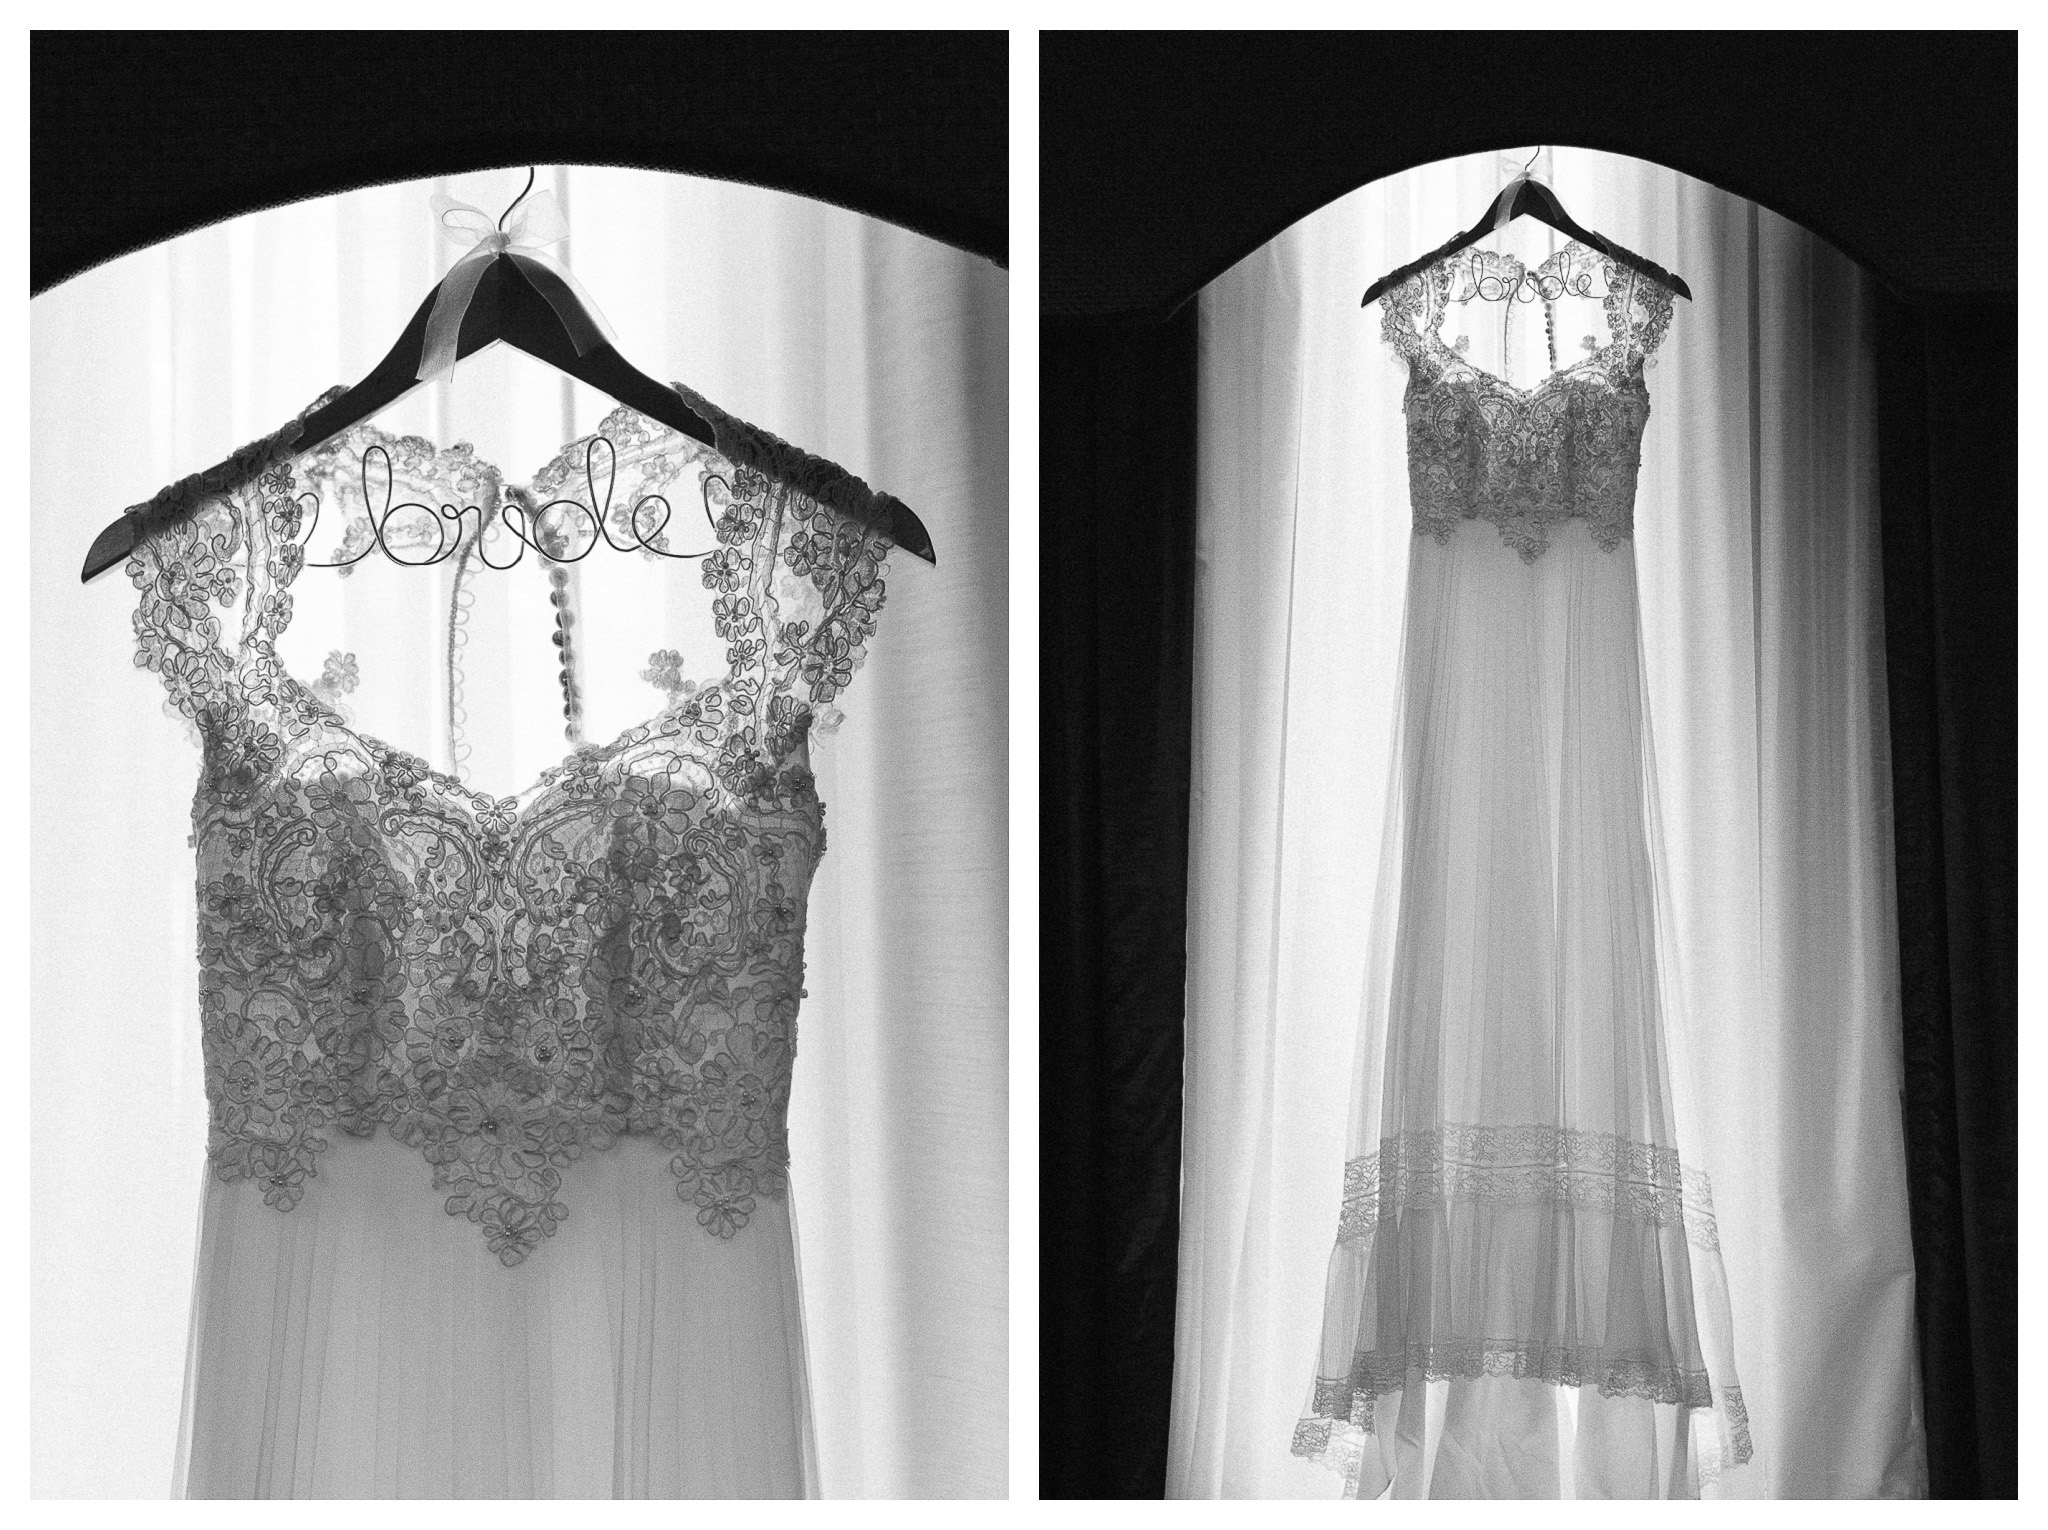 Perfect Sheer Wedding Dress hanging on a bent hanger that spells out bride - Myrtle Beach Wedding - Venue - Beach House Gulf Stream Breeze, Beach Realty Catering and Cake - Buttercream Cakes and Catering, LLC Flowers - Callas Florist Event Rentals - Event Works DJ - Scott Shaw